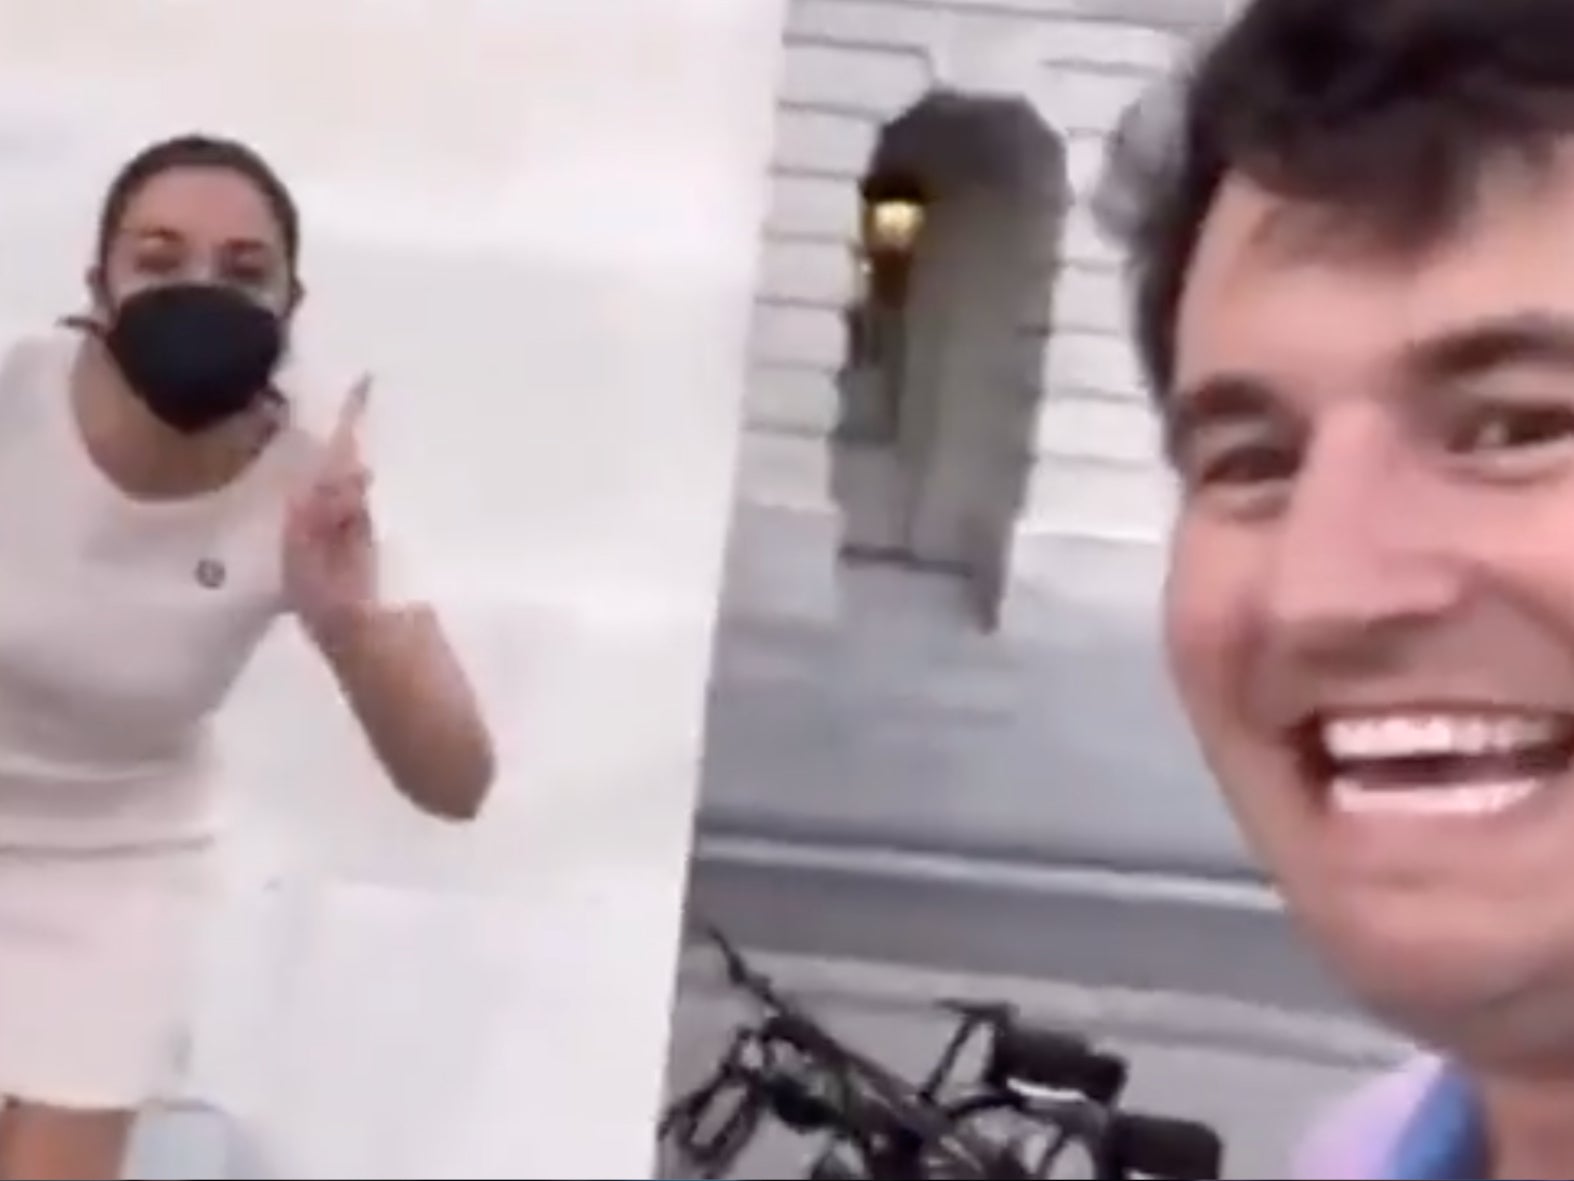 A video shared by Alex Stein on social media of his encounter with AOC